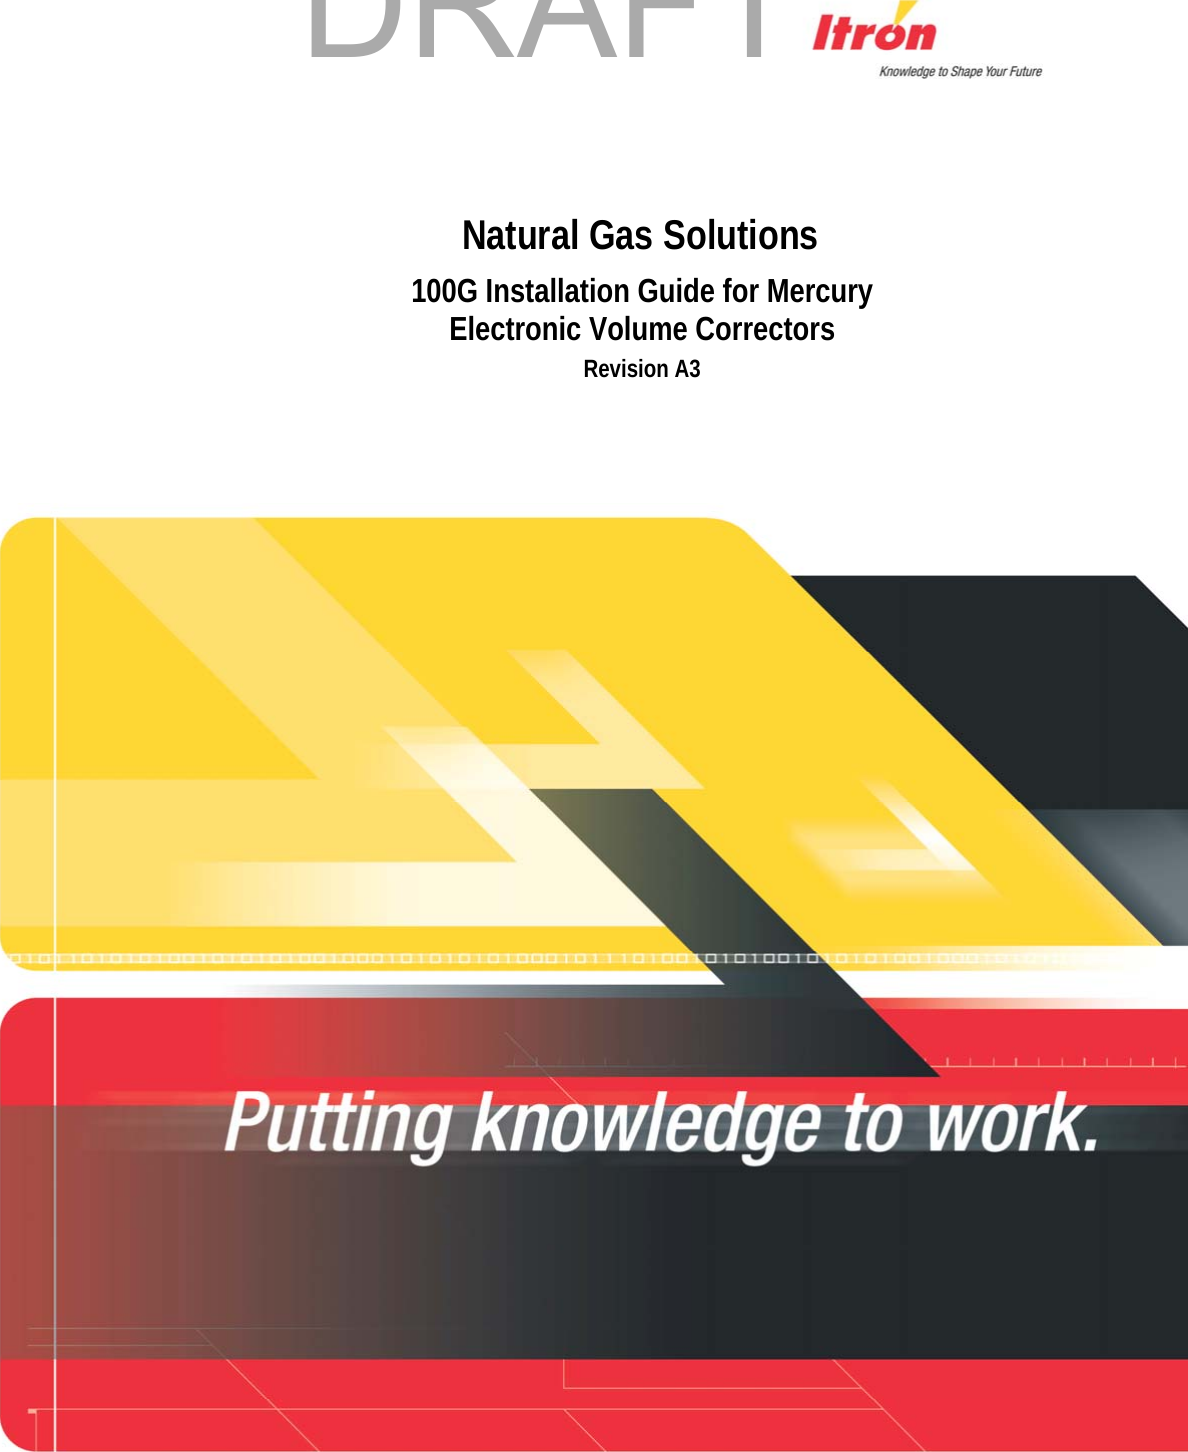    Natural Gas Solutions 100G Installation Guide for Mercury Electronic Volume Correctors Revision A3 Natural Gas Solutions   DRAFT